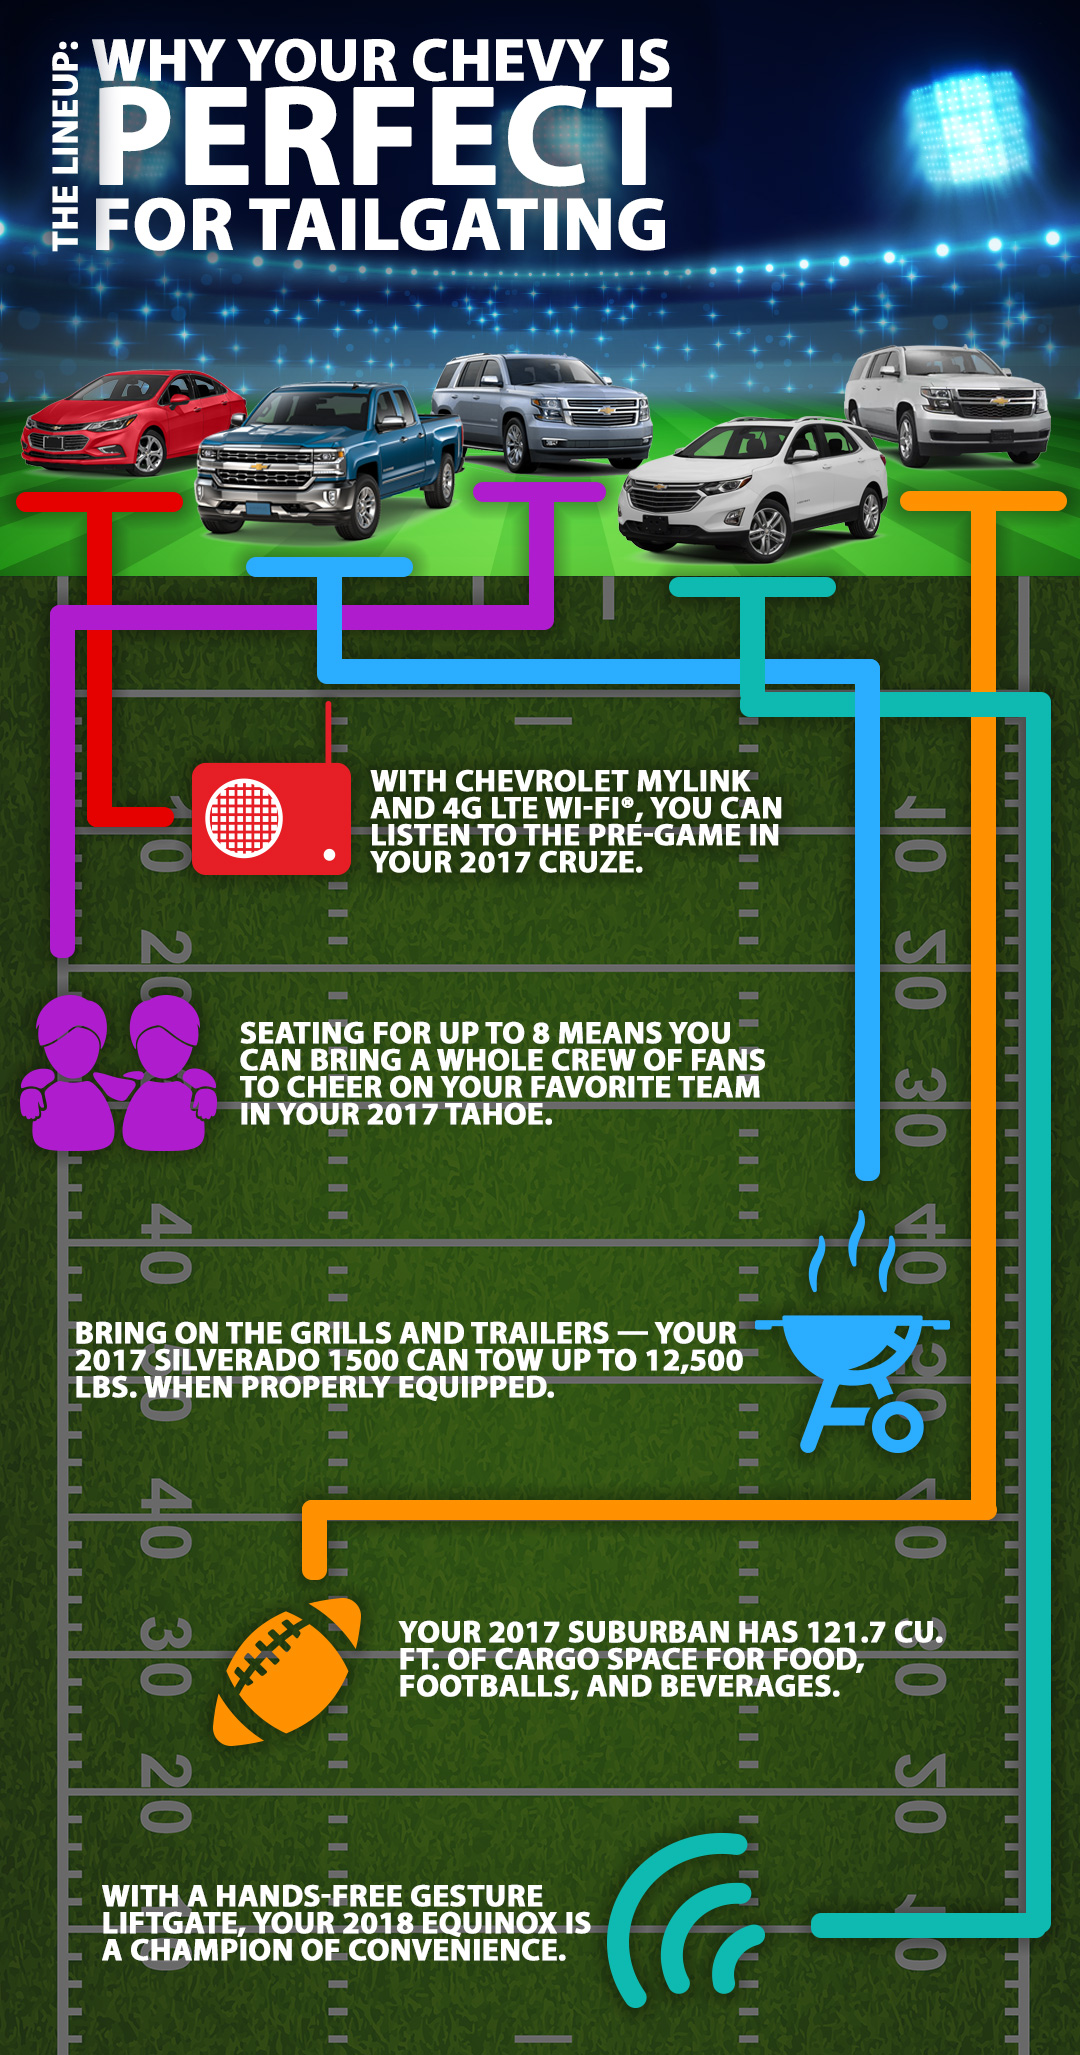 An infographic showing five reasons Chevy vehicles are good for tailgating